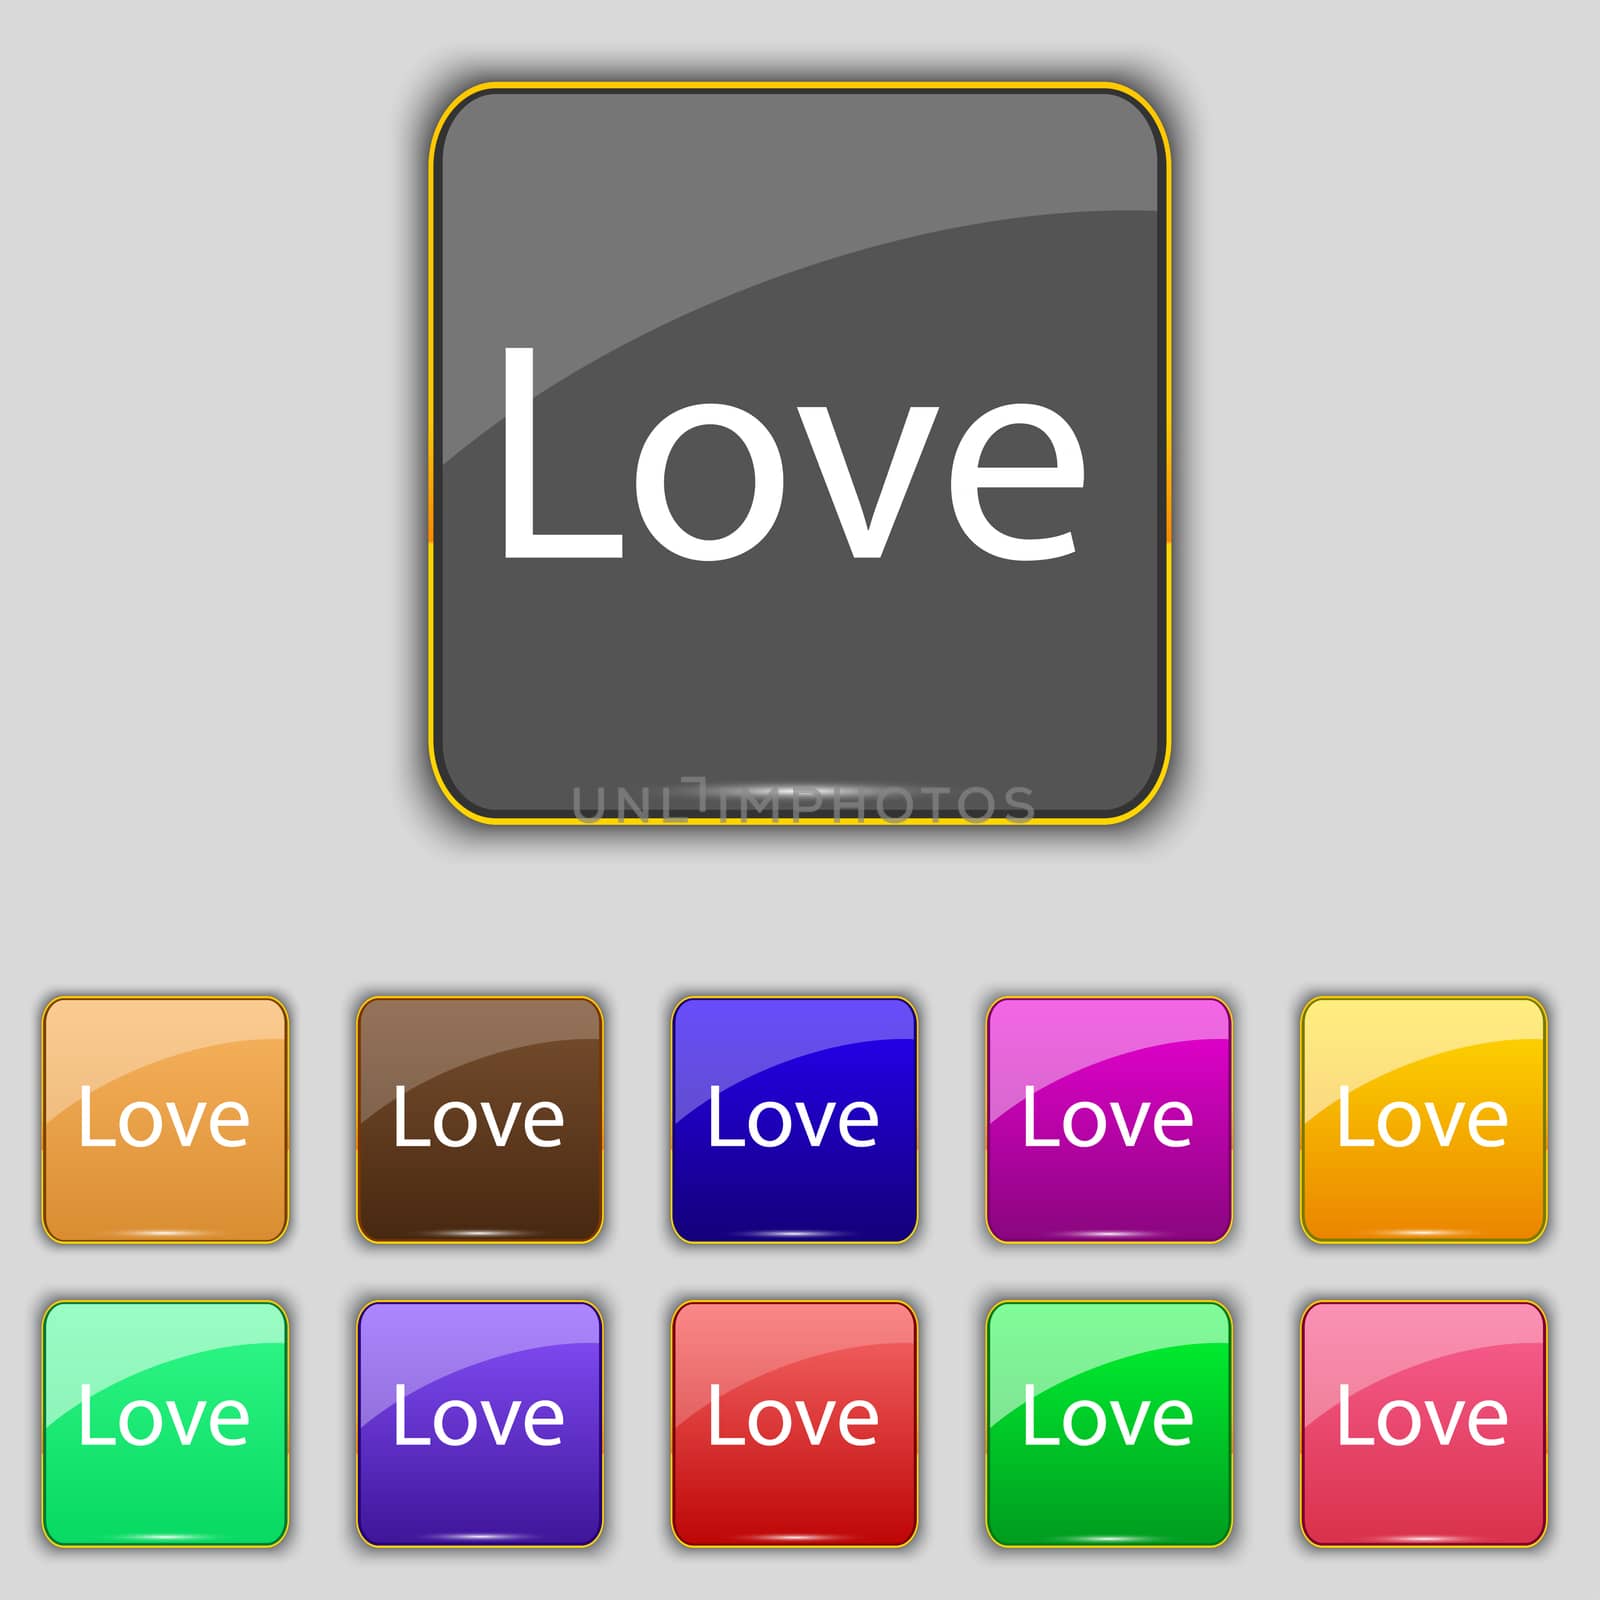 Love you sign icon. Valentines day symbol. Set of colored buttons. illustration